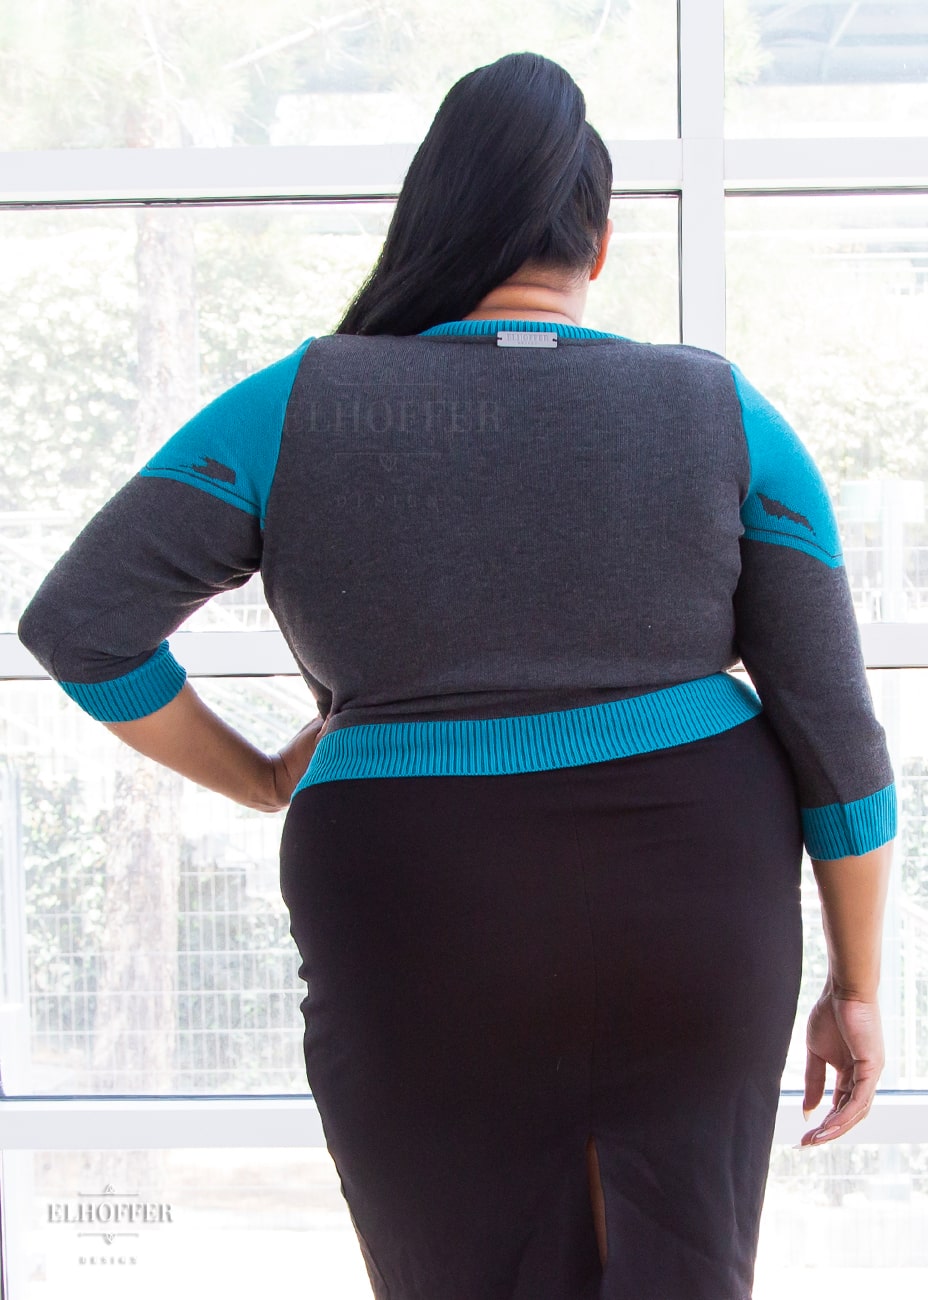 Tas is modeling the Production 2XL. She has a 51” Bust, 39.5” Waist, 52” Hips, and is 5’6”.